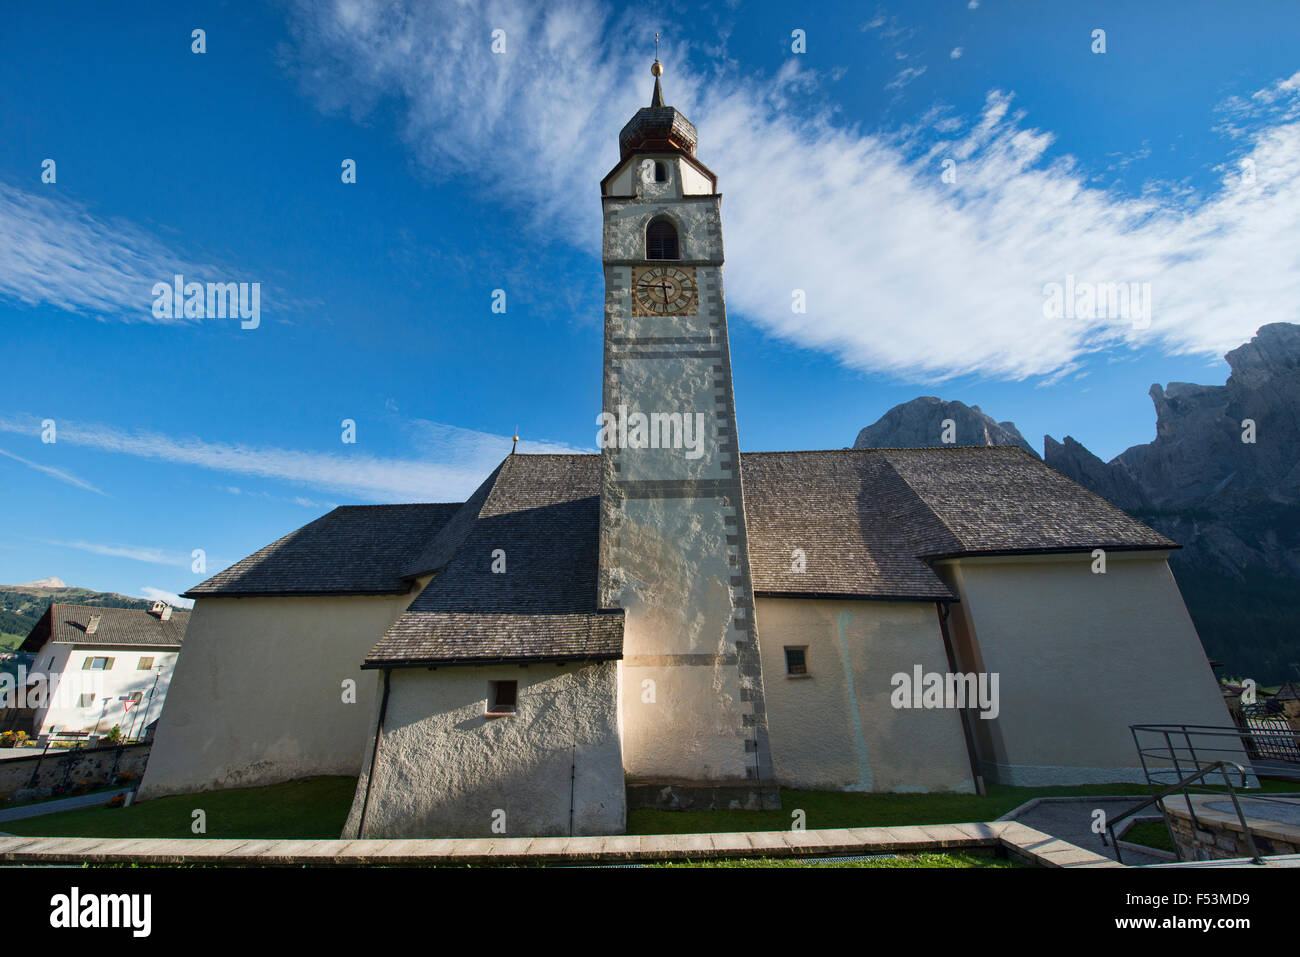 The church in Colfosco in late afternoon light, Dolomites, Italy Stock Photo